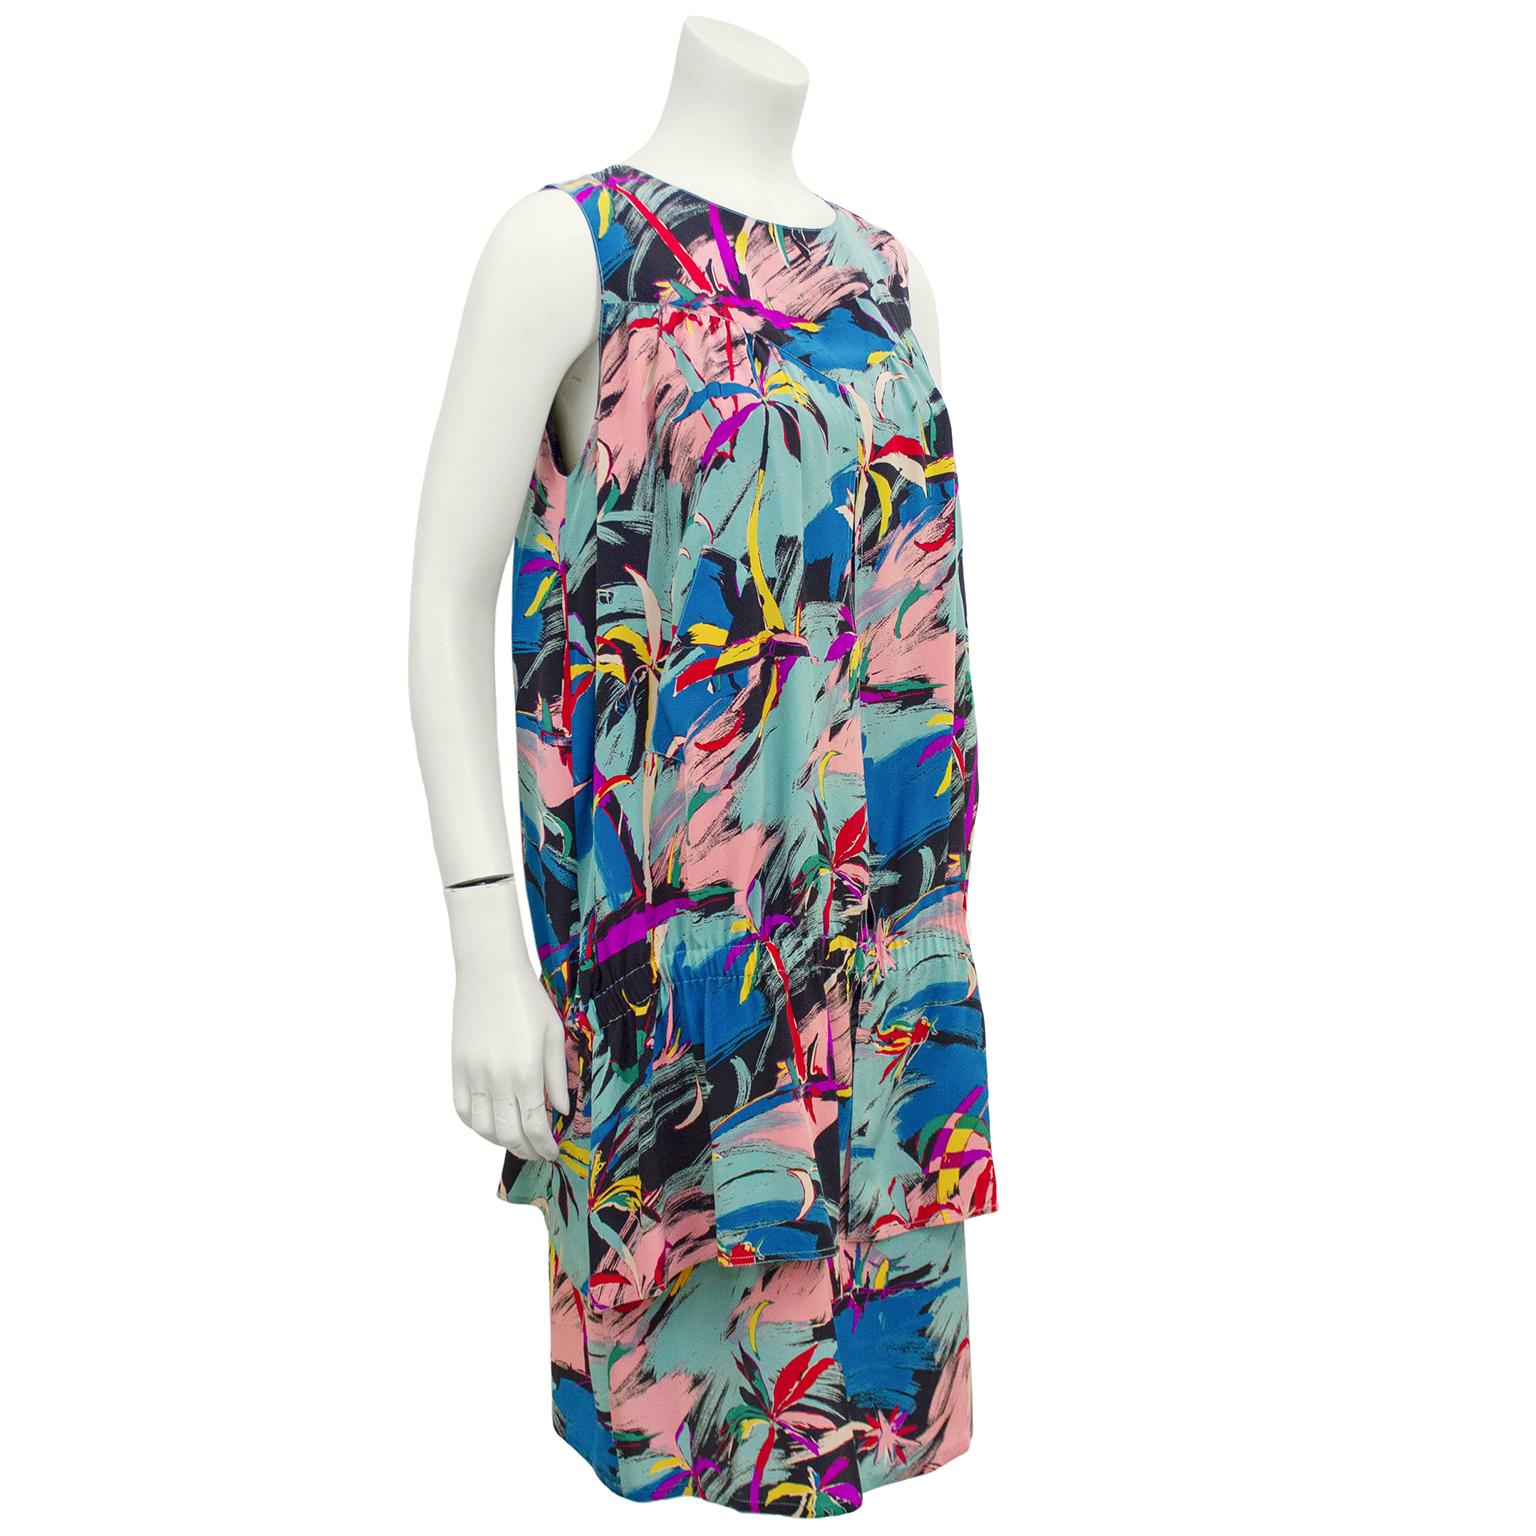 Interesting Karl Lagerfeld abstract brush stroke, tropical print dress from the 1980s. Mix of bright and pastel colours. Slated pocket details at waist. Sleeveless, drop elastic waist and tiered hem. Excellent vintage condition. Fits like a US 6. 